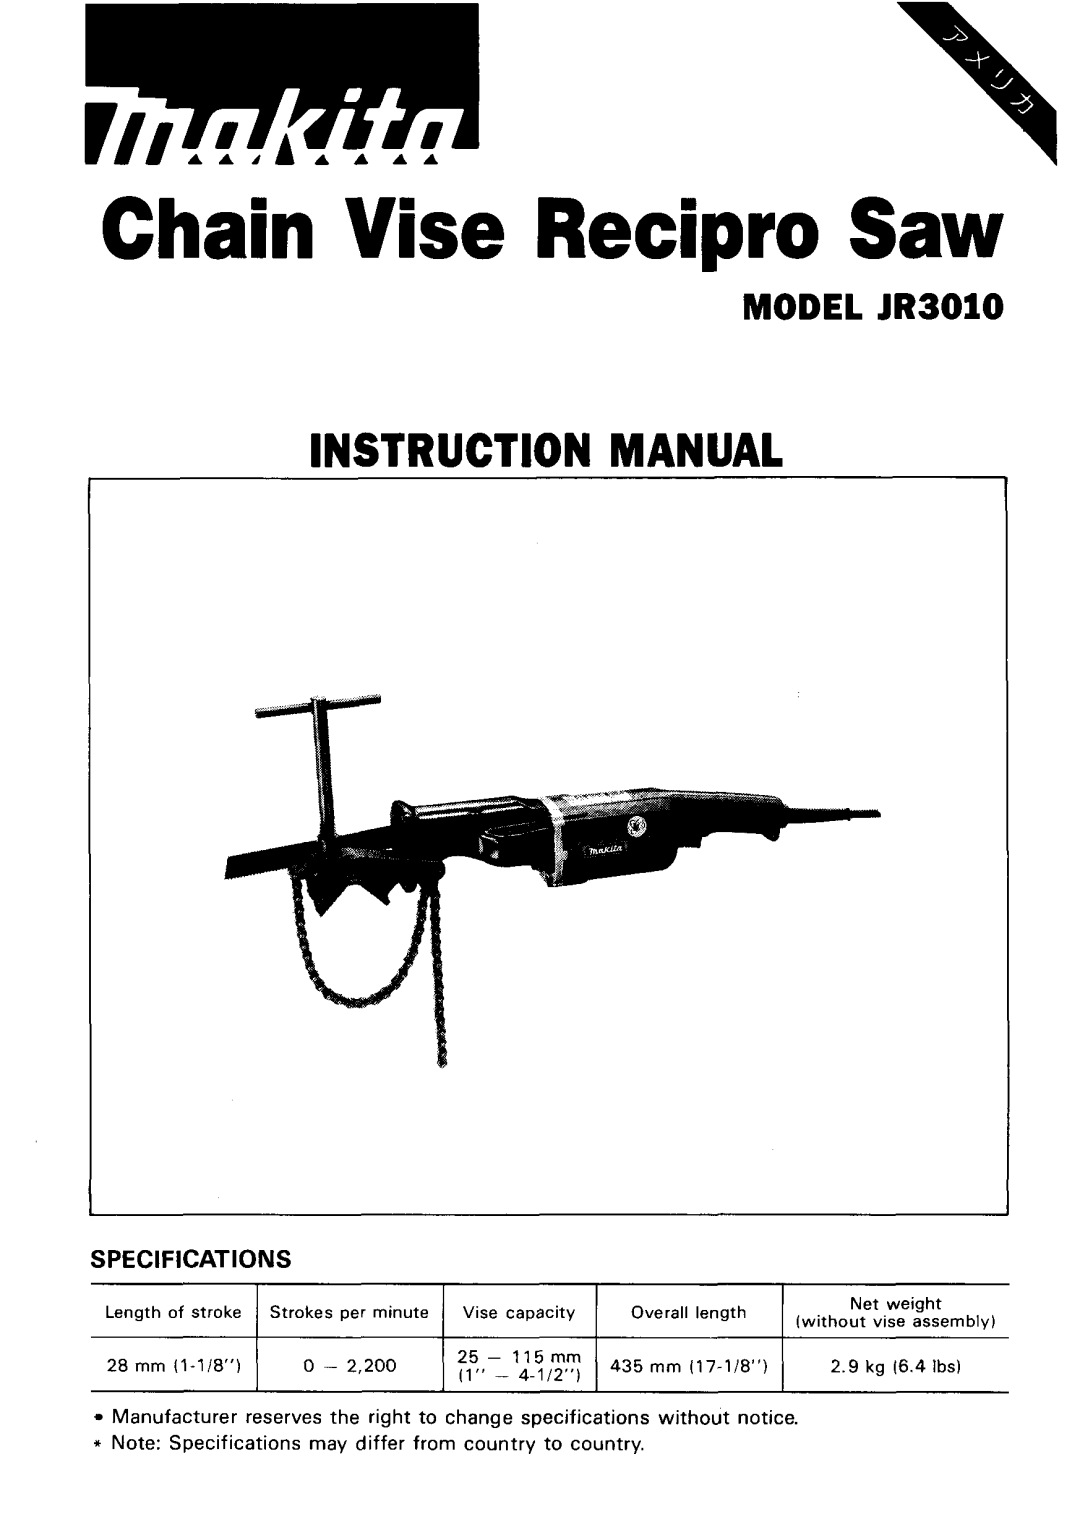 Makita instruction manual Specifications, Chain Vise Recipro Saw, MODEL JR3010 